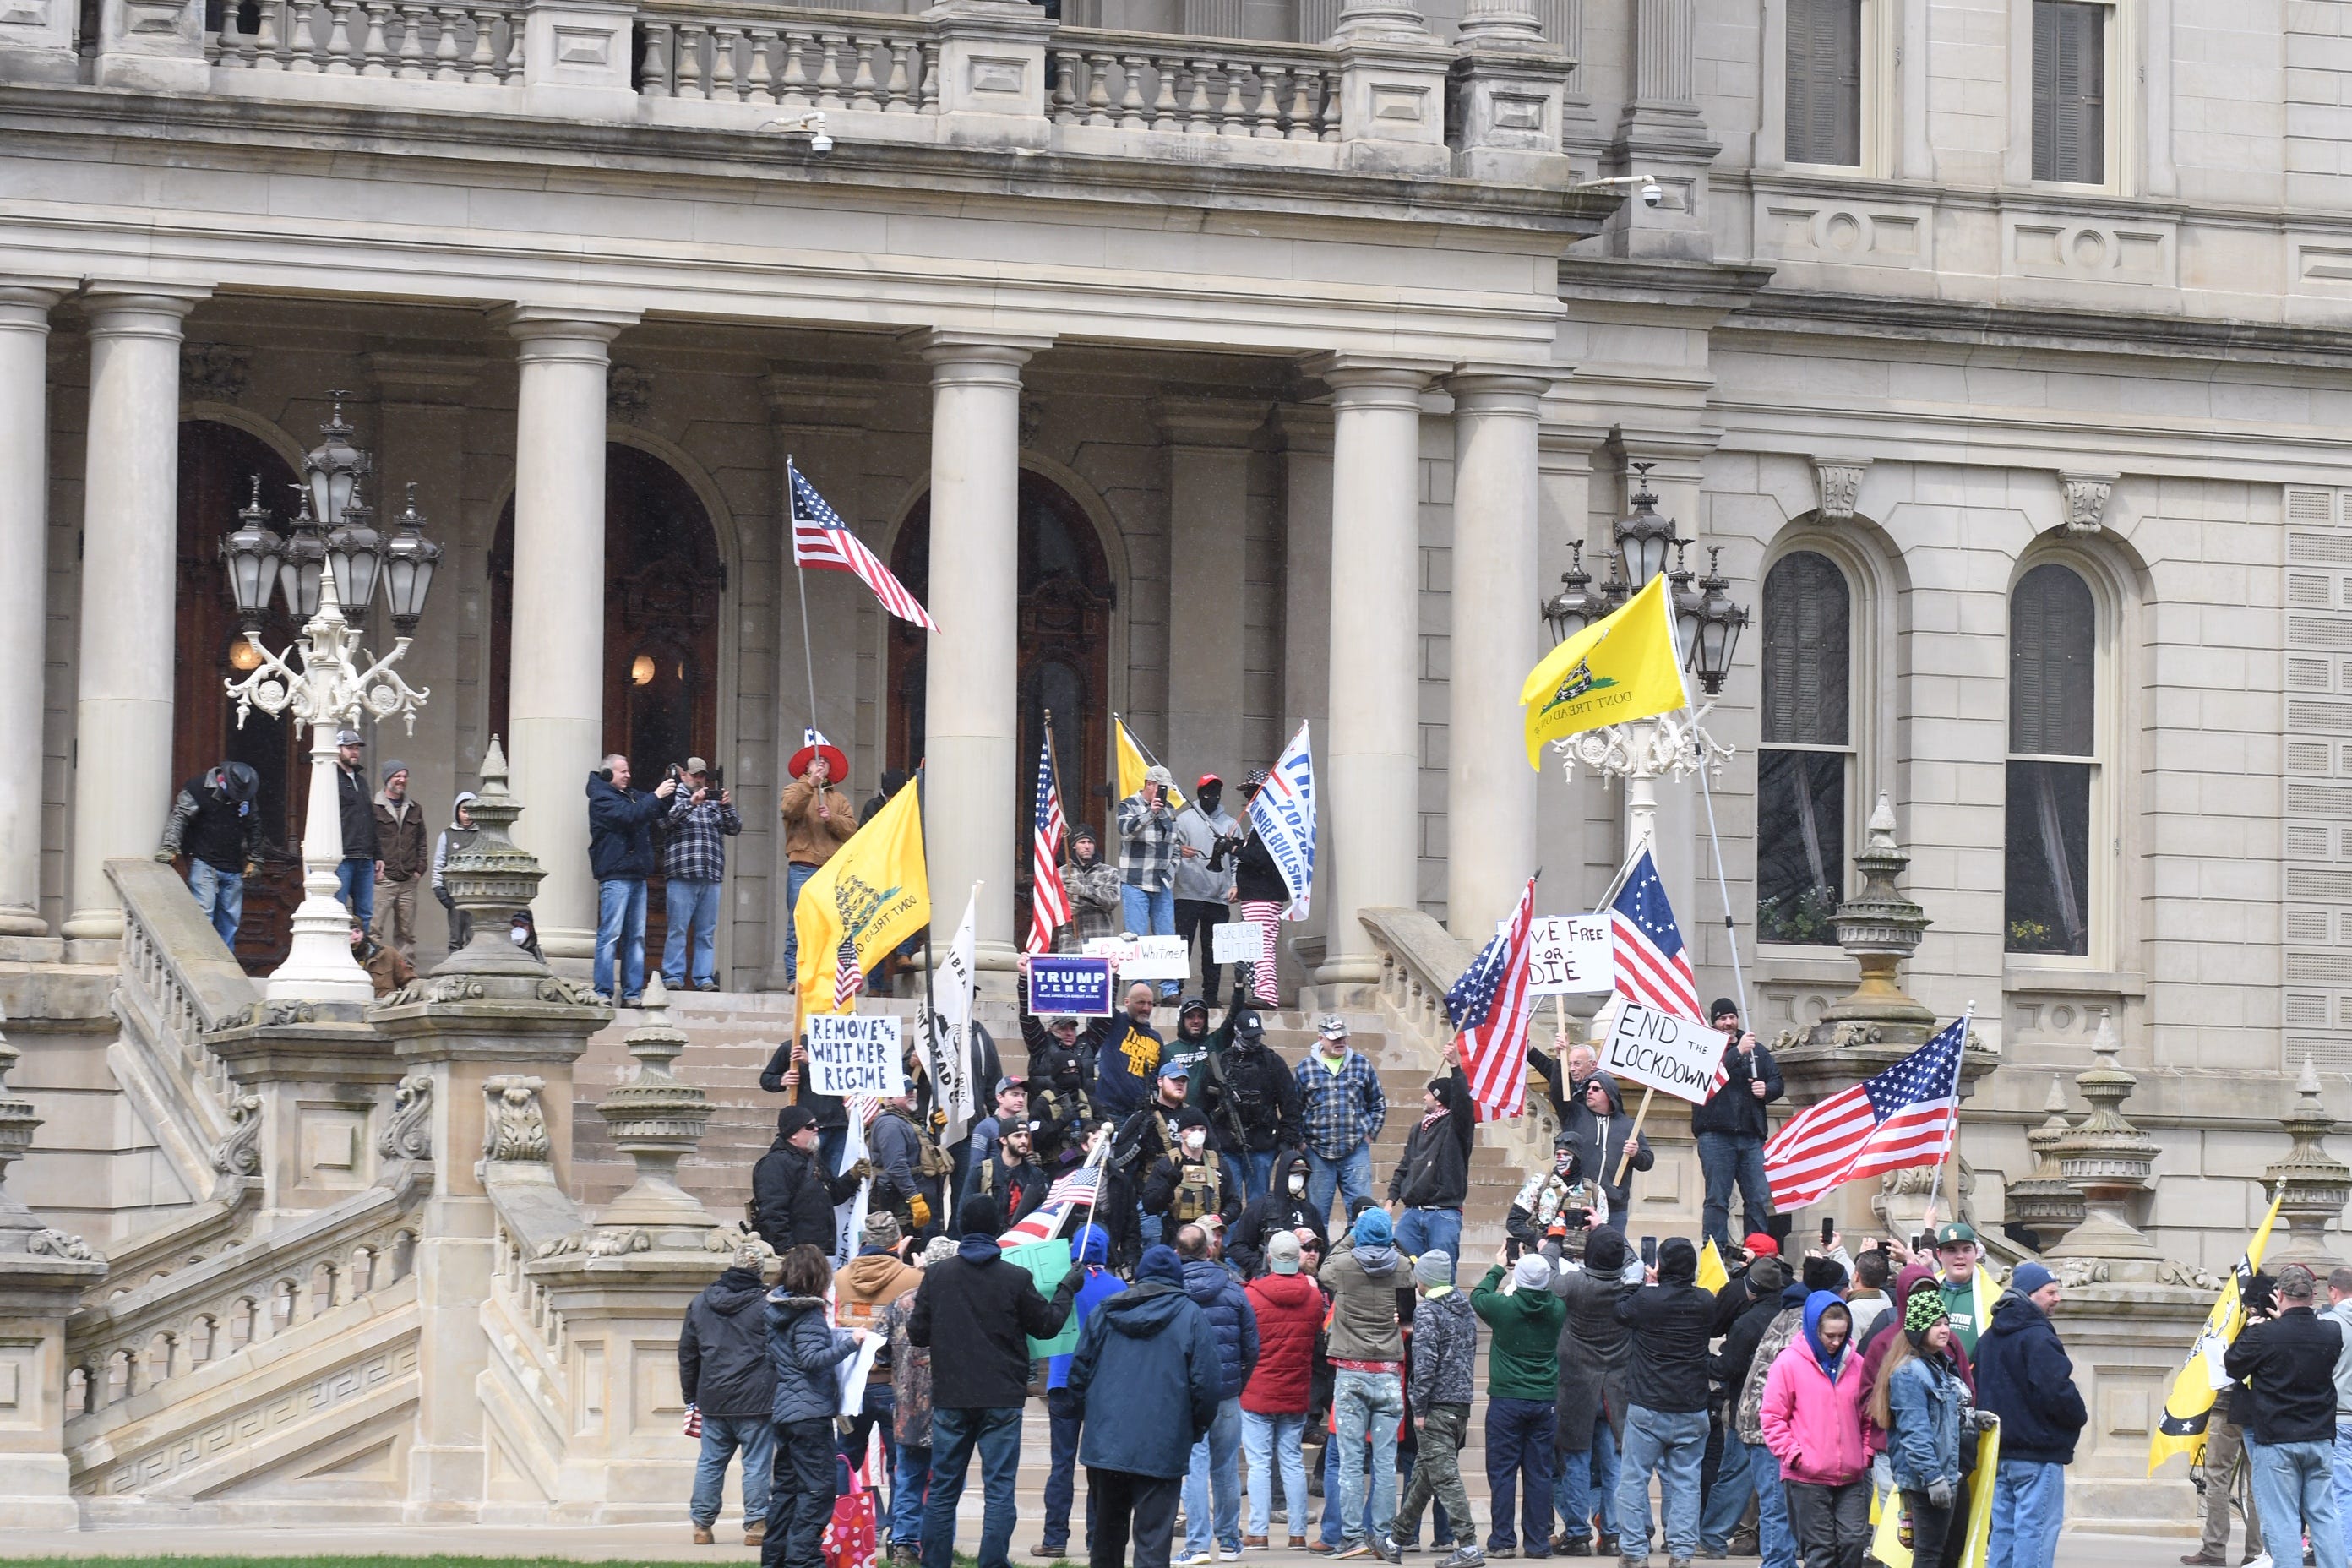 Individuals protesting Gov. Gretchen Whitmer ' s stay-home order gather, waving flags and signs against the safety measures intended to stop the spread of coronavirus on the front steps of the Capitol in Lansing on Wednesday, April 15, 2020.